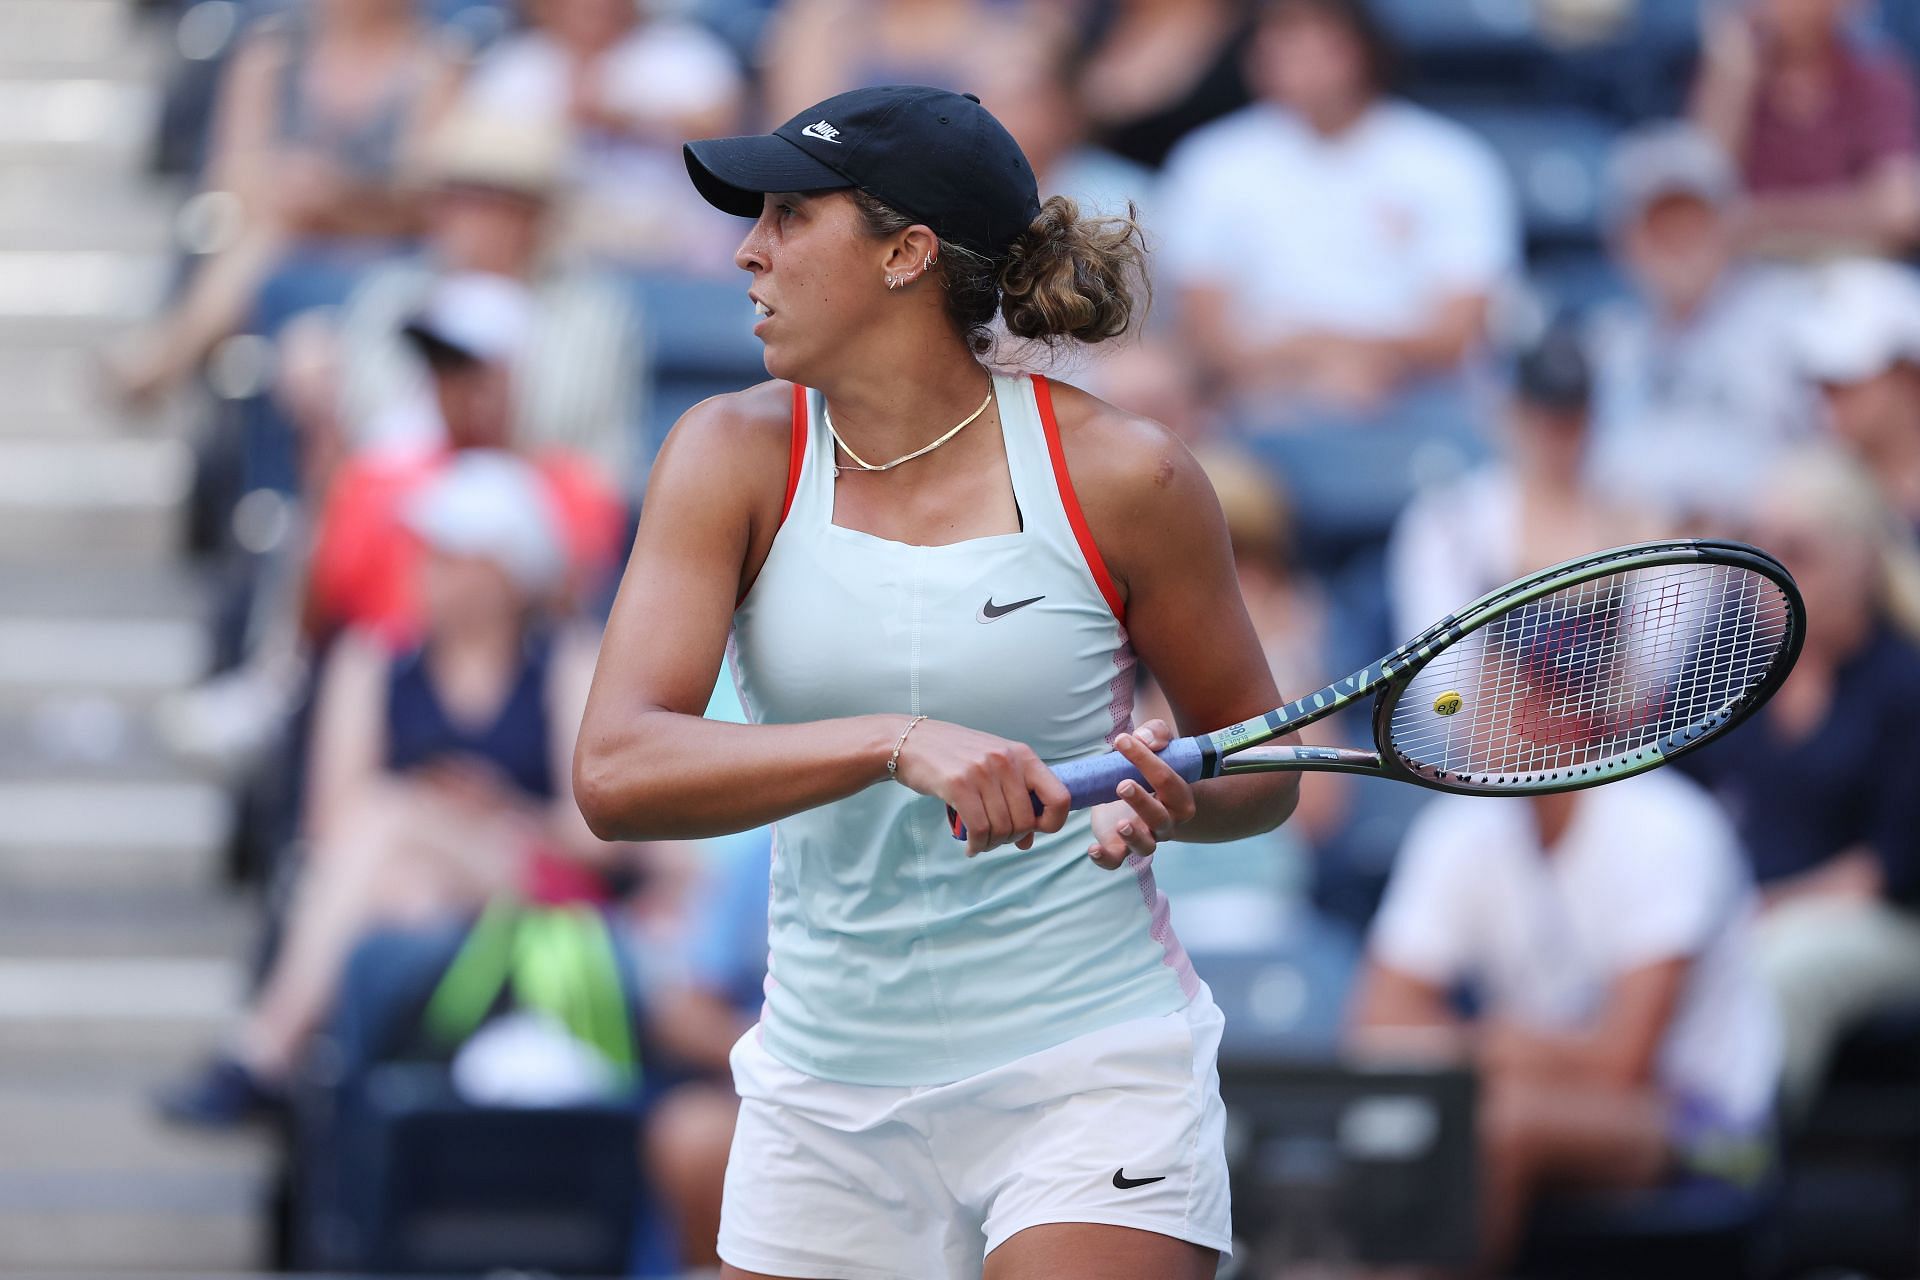 Madison Keys at the 2022 US Open - Day 3